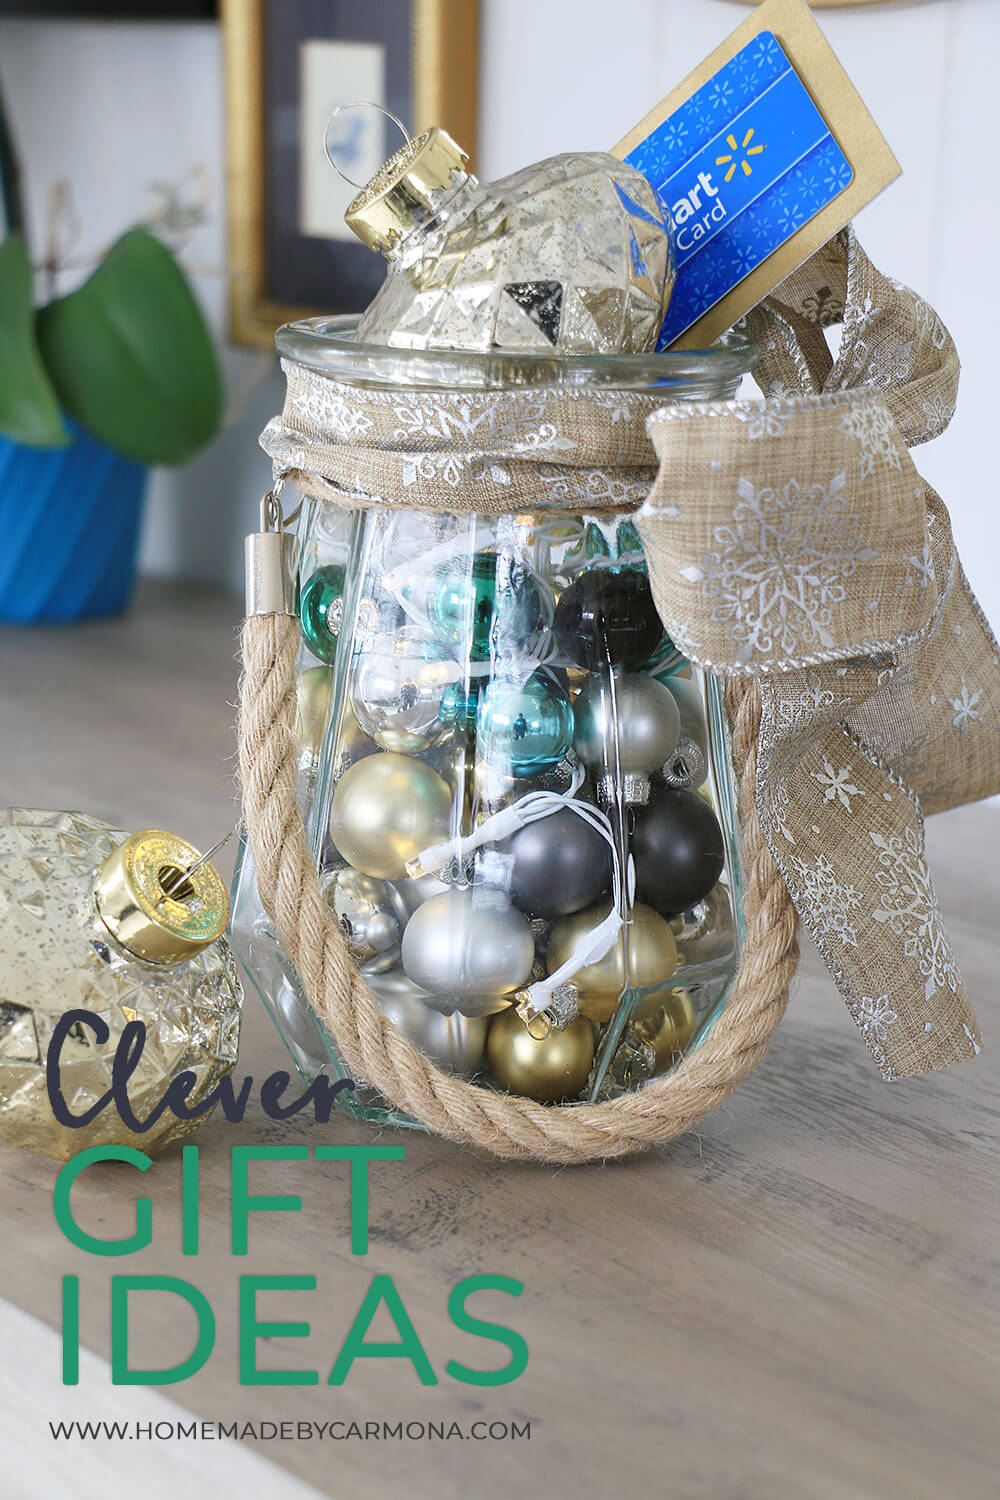 Clever-Gift-Ideas